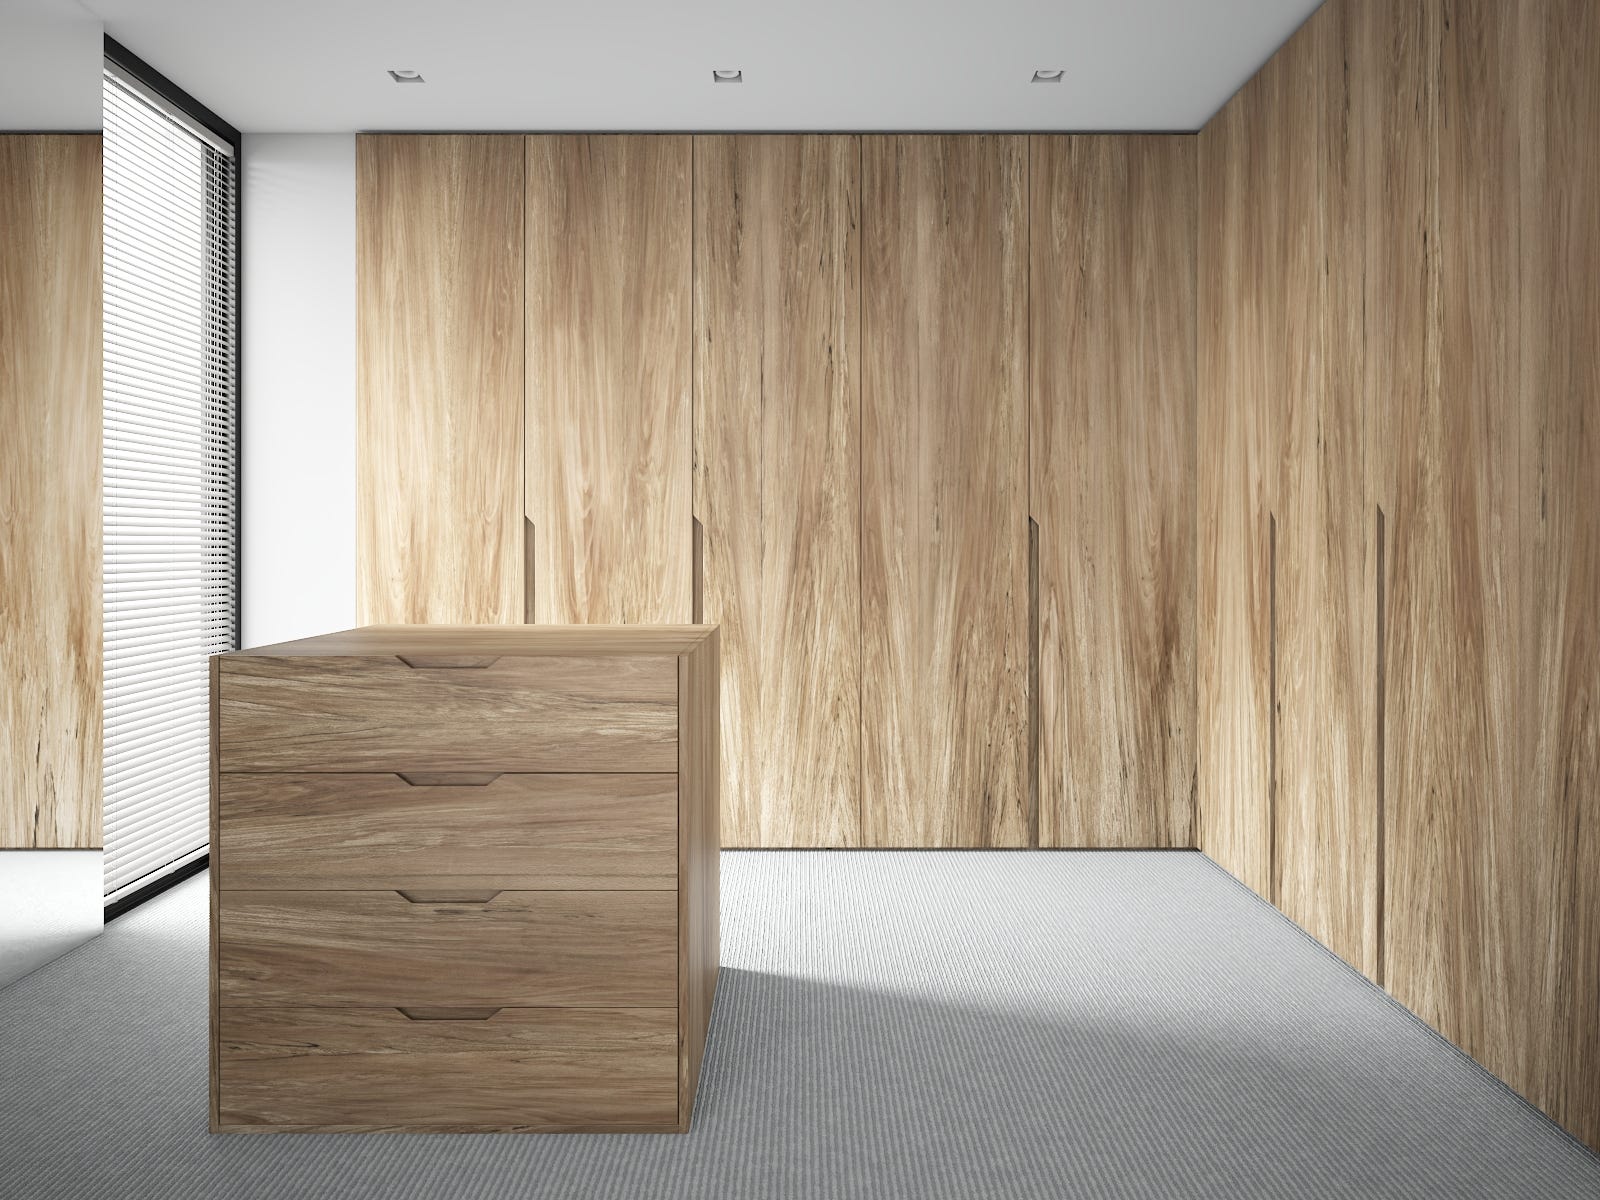 Why Wood Veneer Is One Of The Boldest Design Choices You Can Make